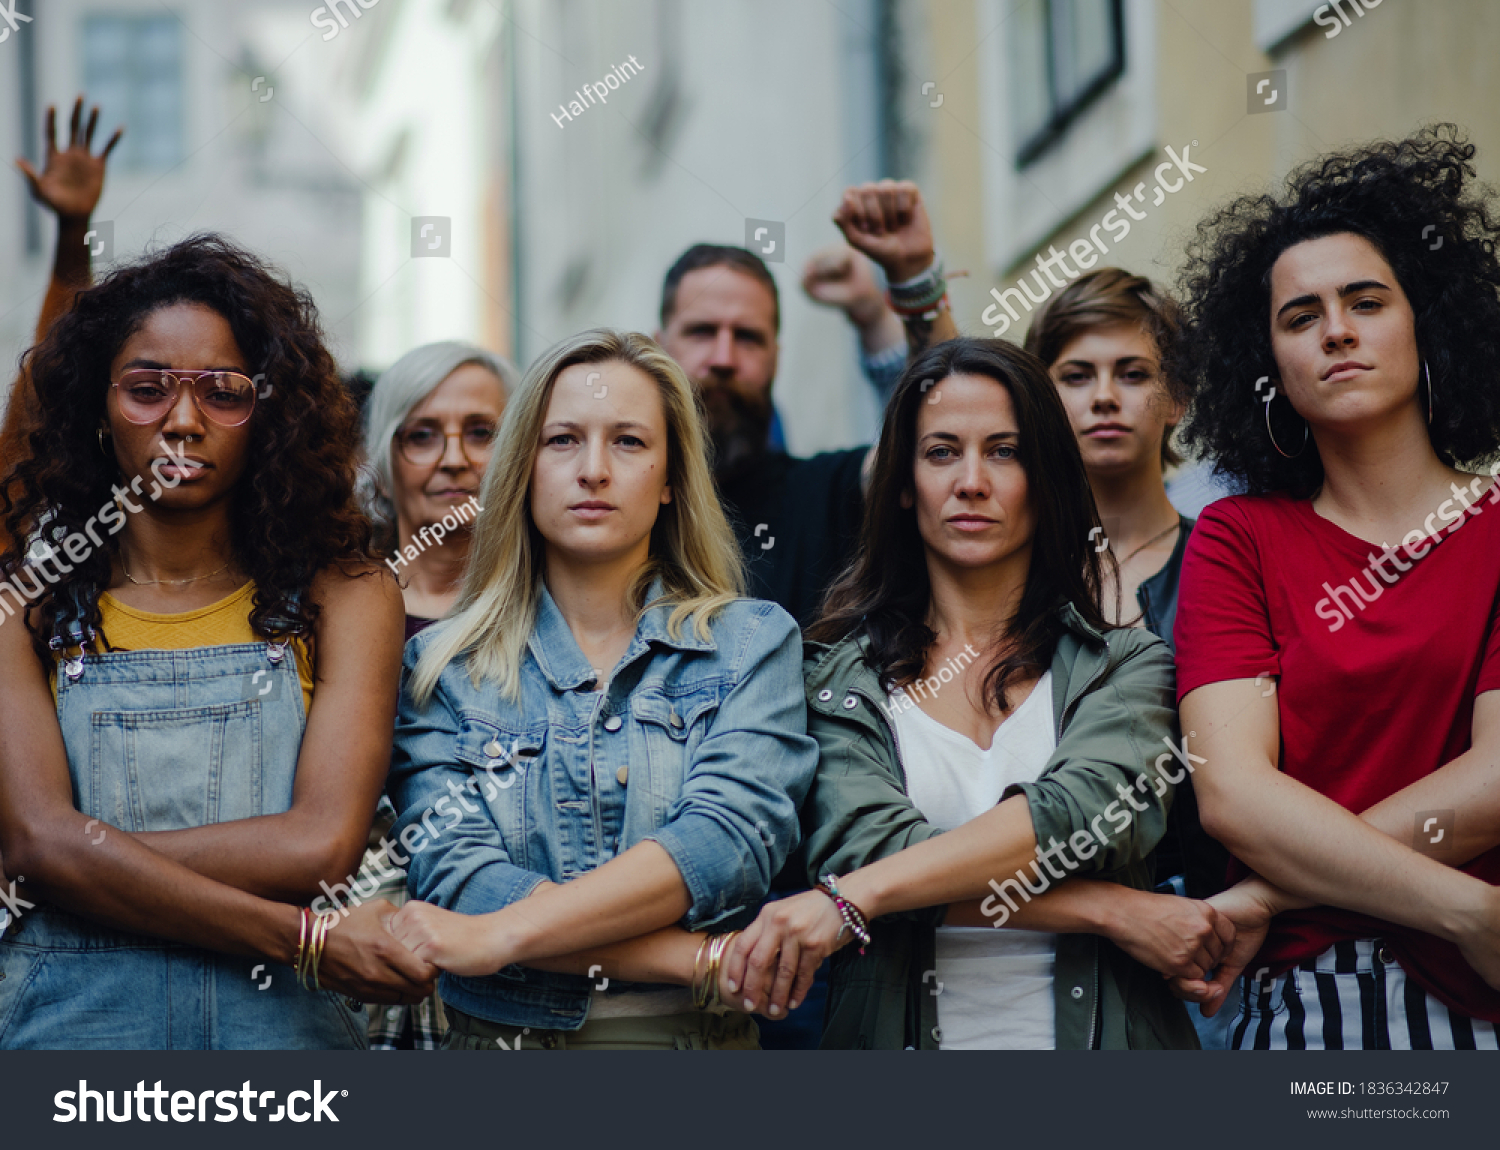 Group of people activists protesting on streets, women march and demonstration concept. #1836342847